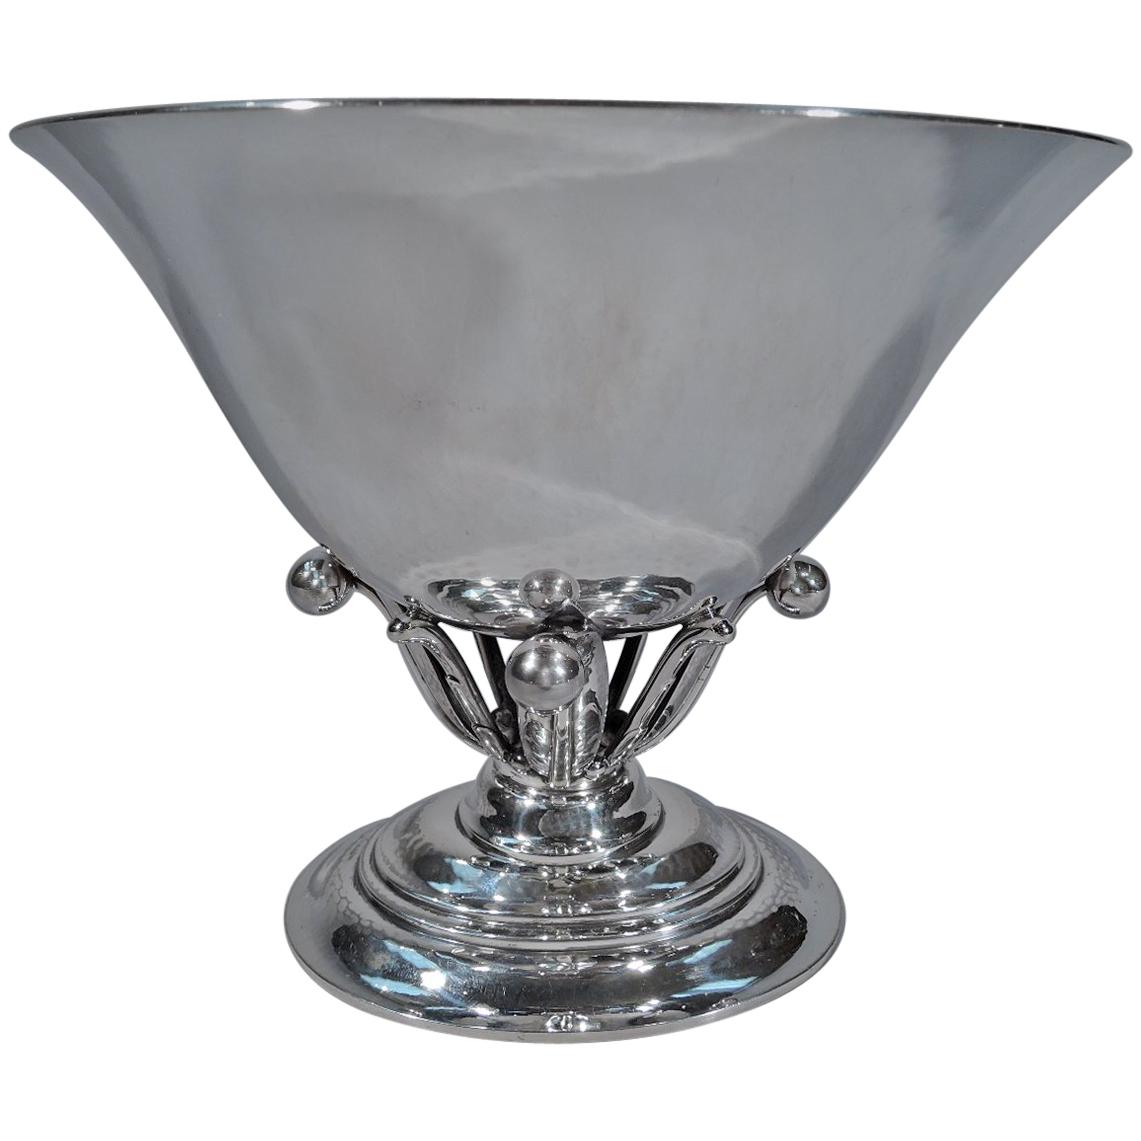 Georg Jensen Hand-Hammered Sterling Silver Footed Bowl